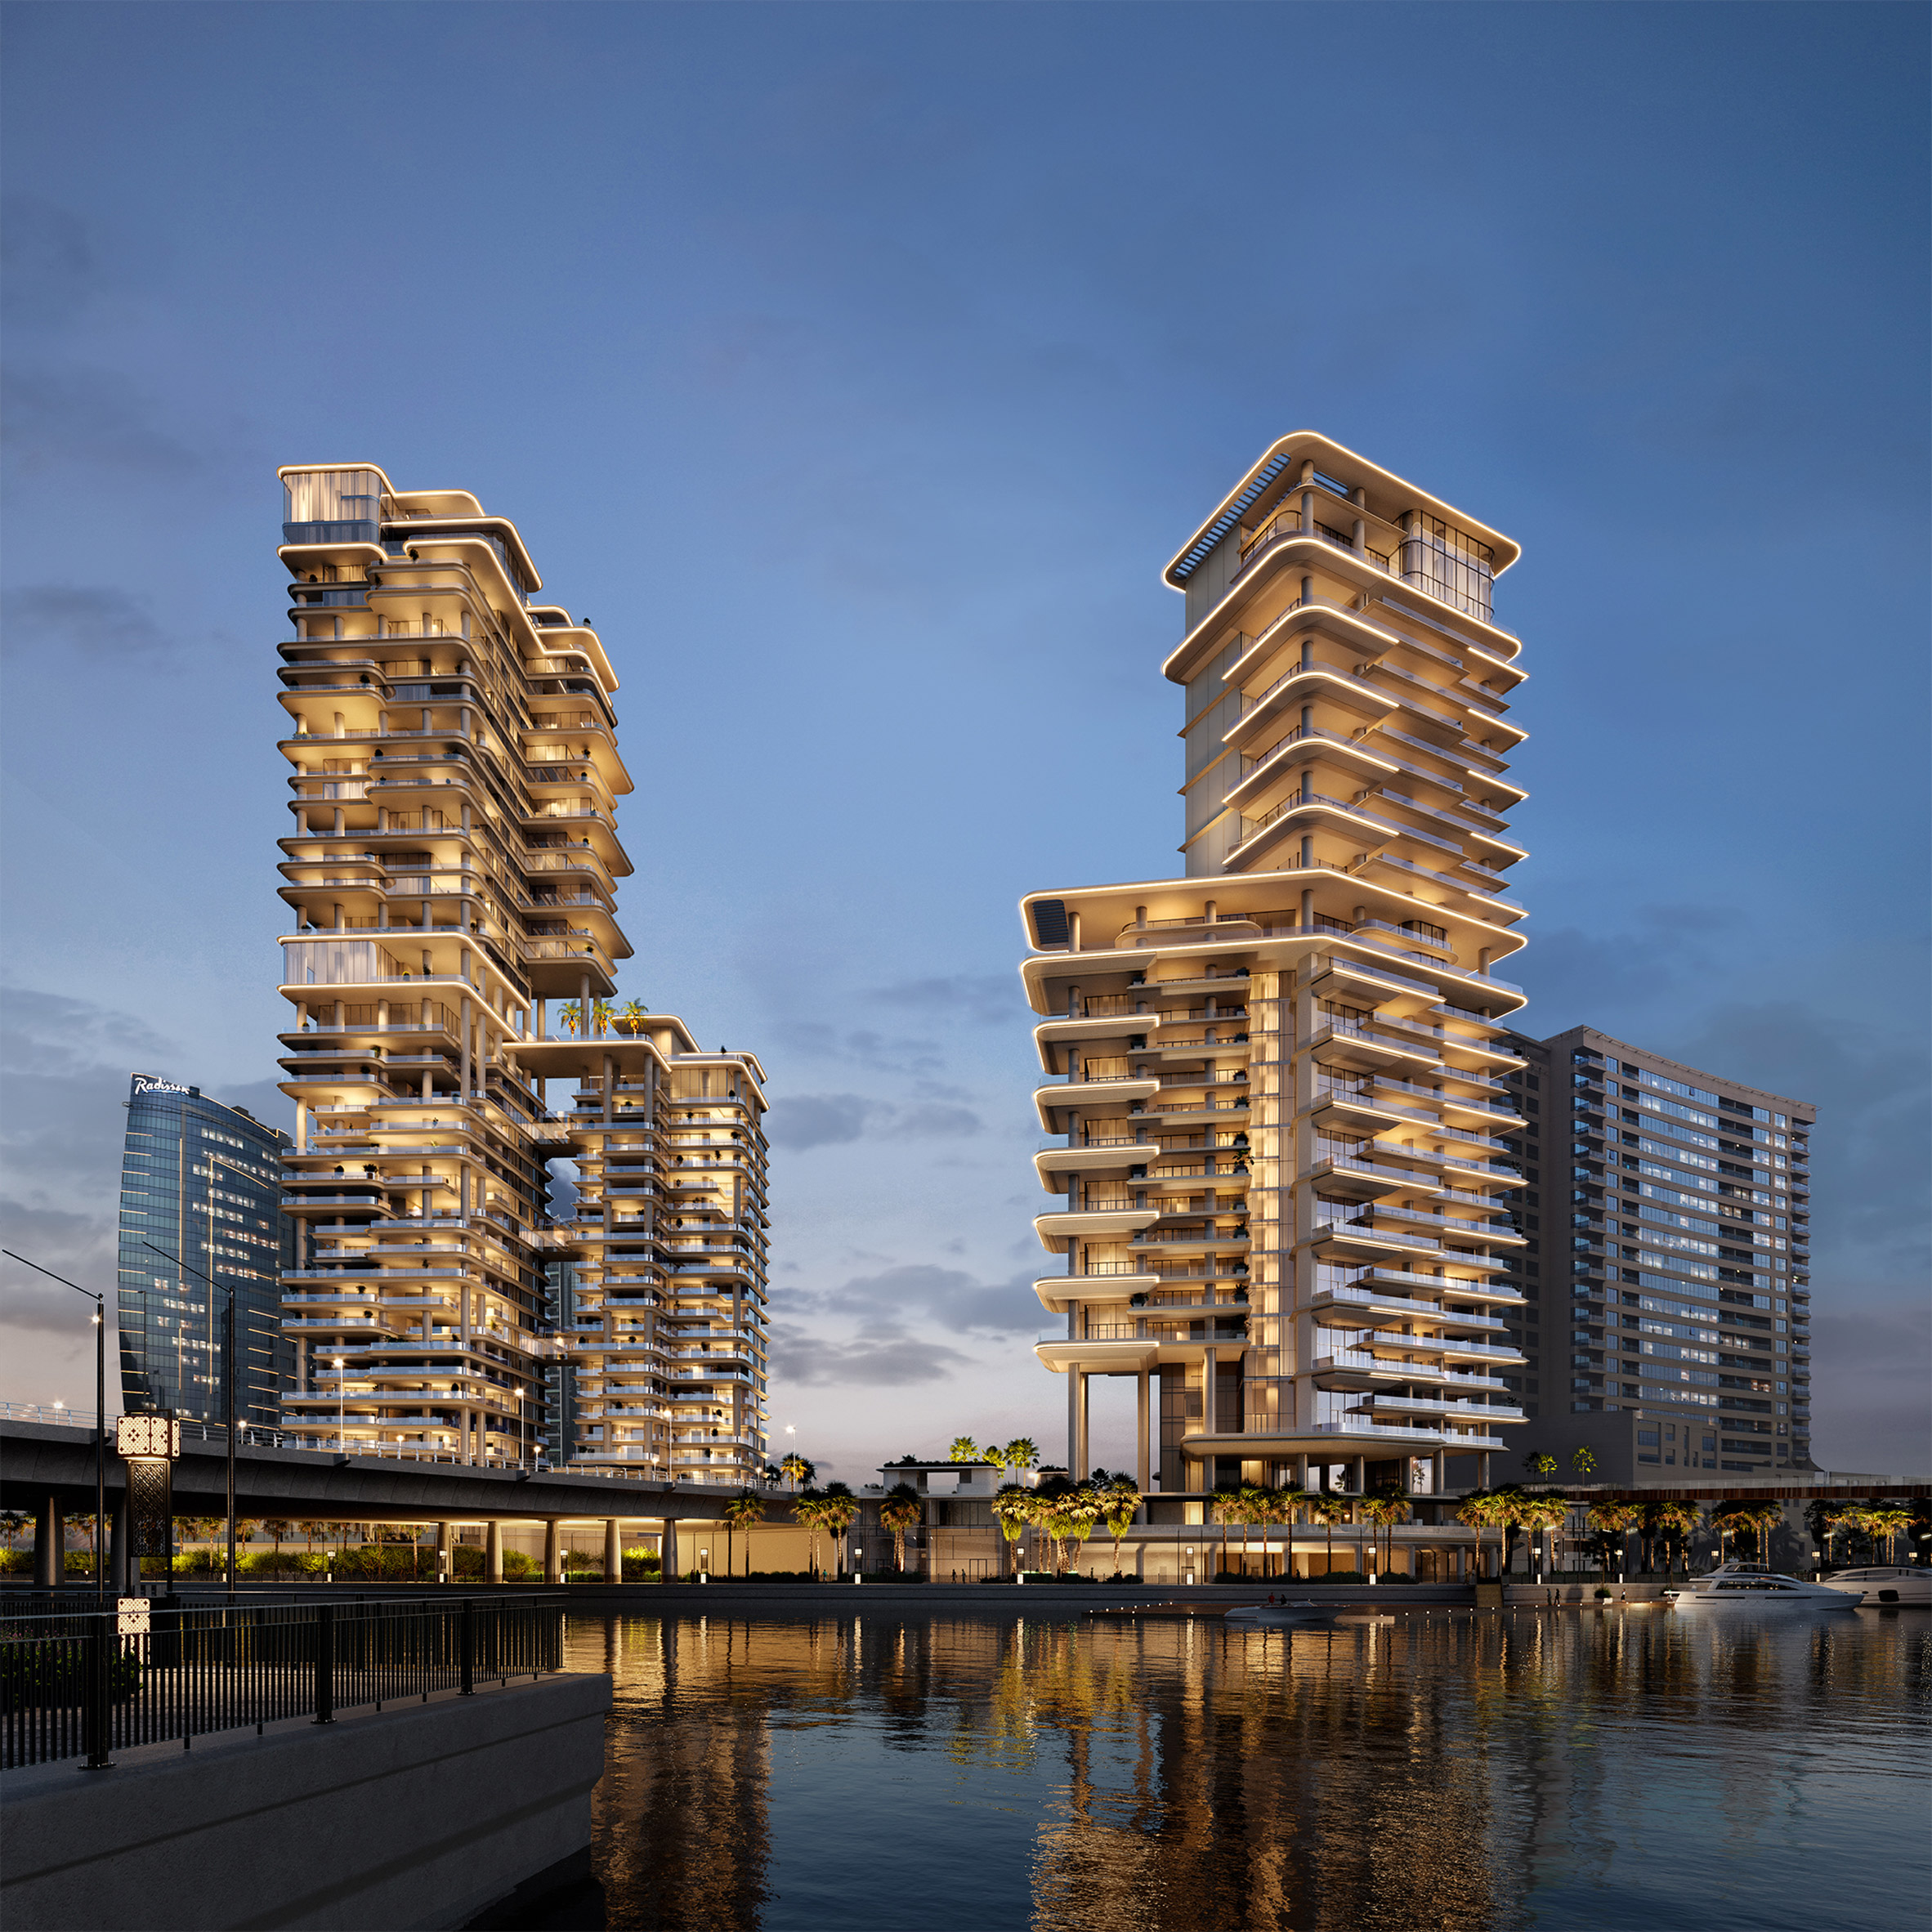 Vela and Vela Viento skyscrapers by Foster + Partners for Omniyat